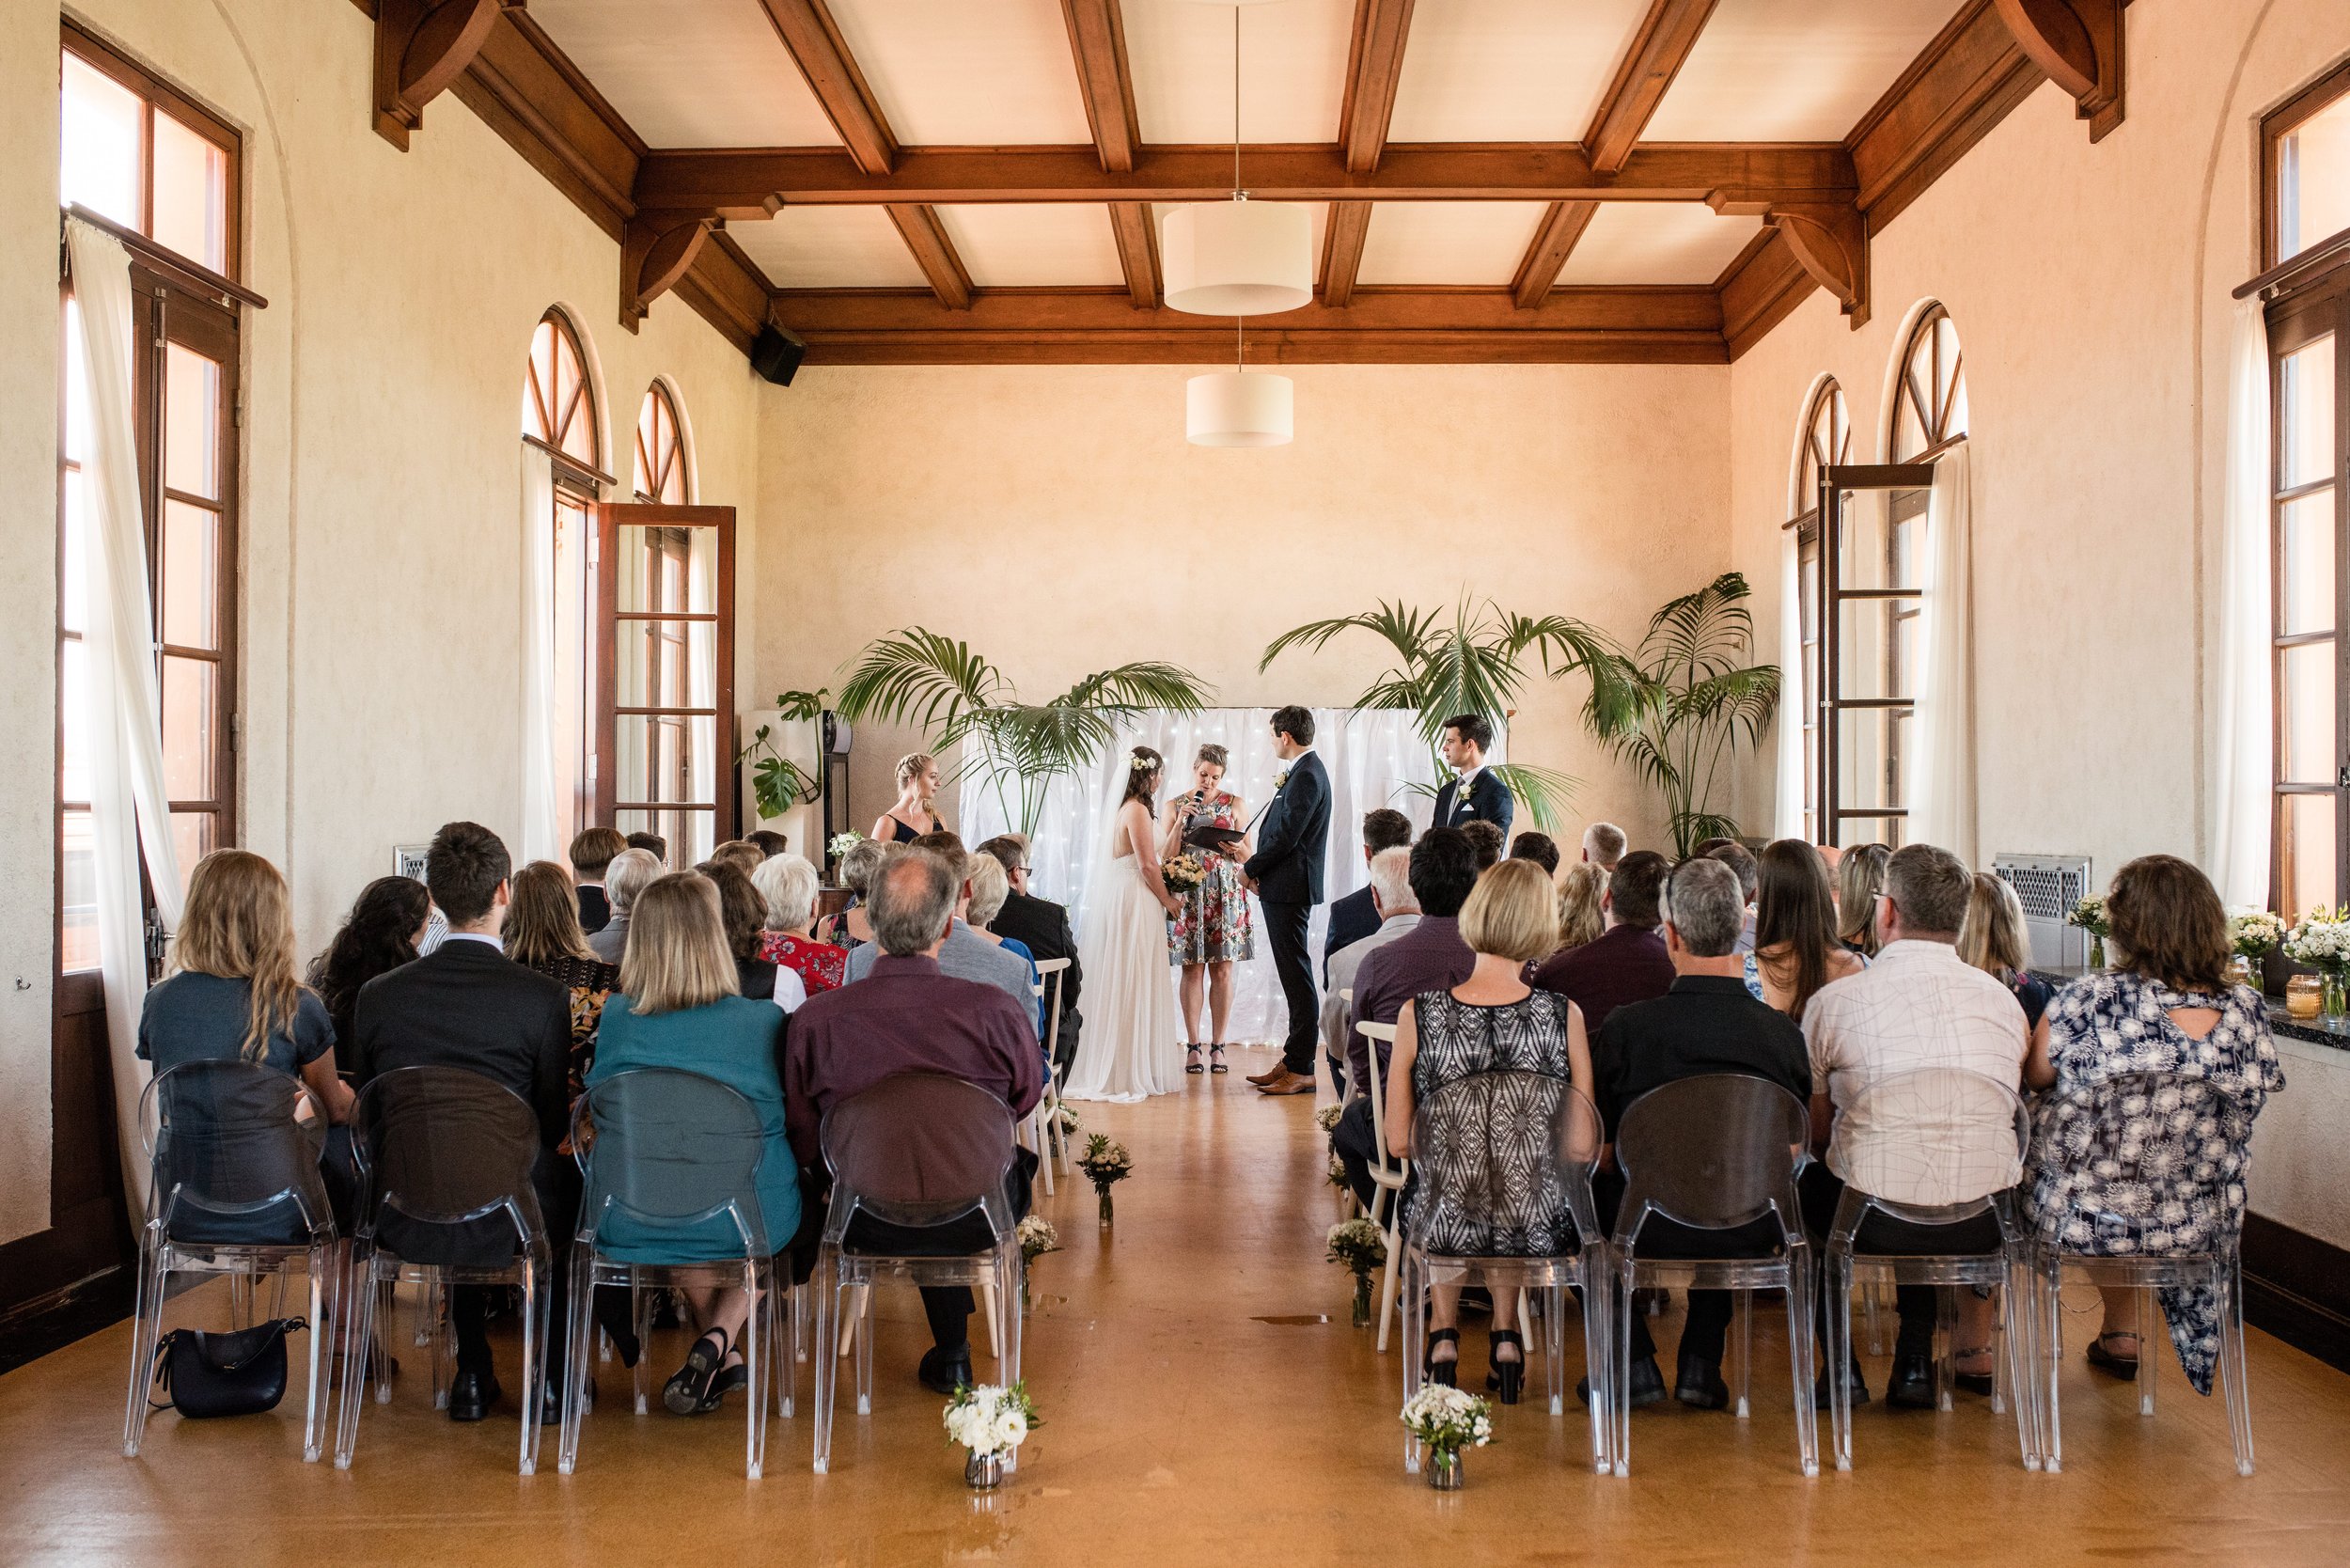  Wedding Ceremony in the Social Room at The Blue Baths in Rotorua 